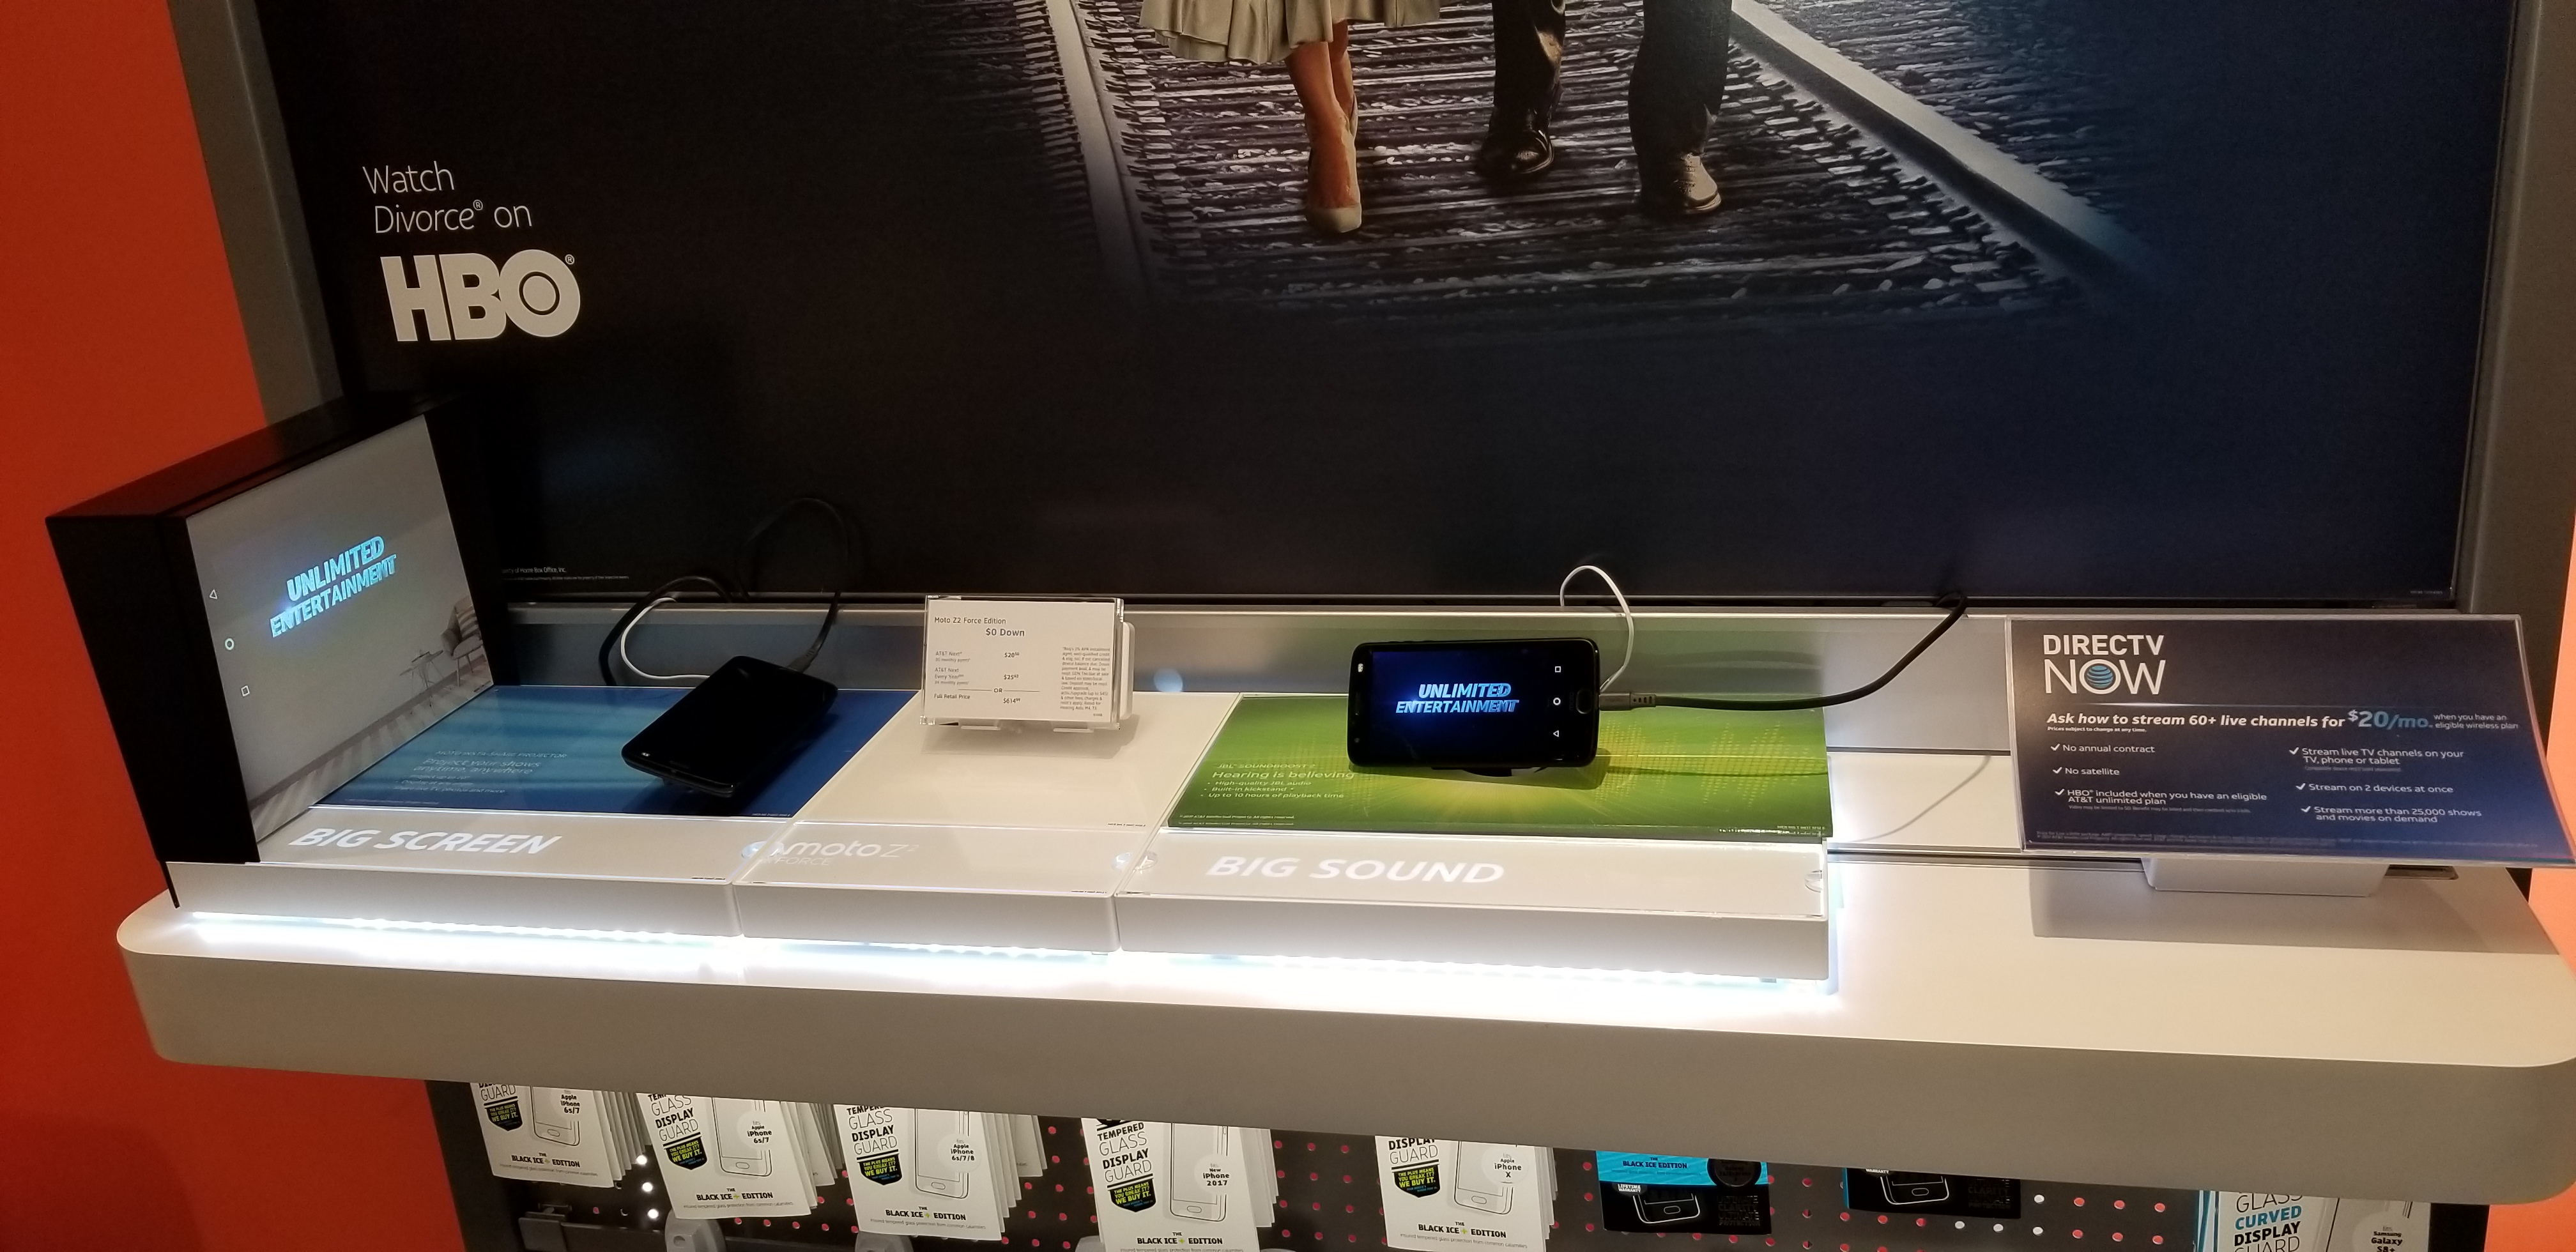 AT&T Store | 3407 10th St, Suite A, Great Bend, KS, 67530 | +1 (620) 603-4971